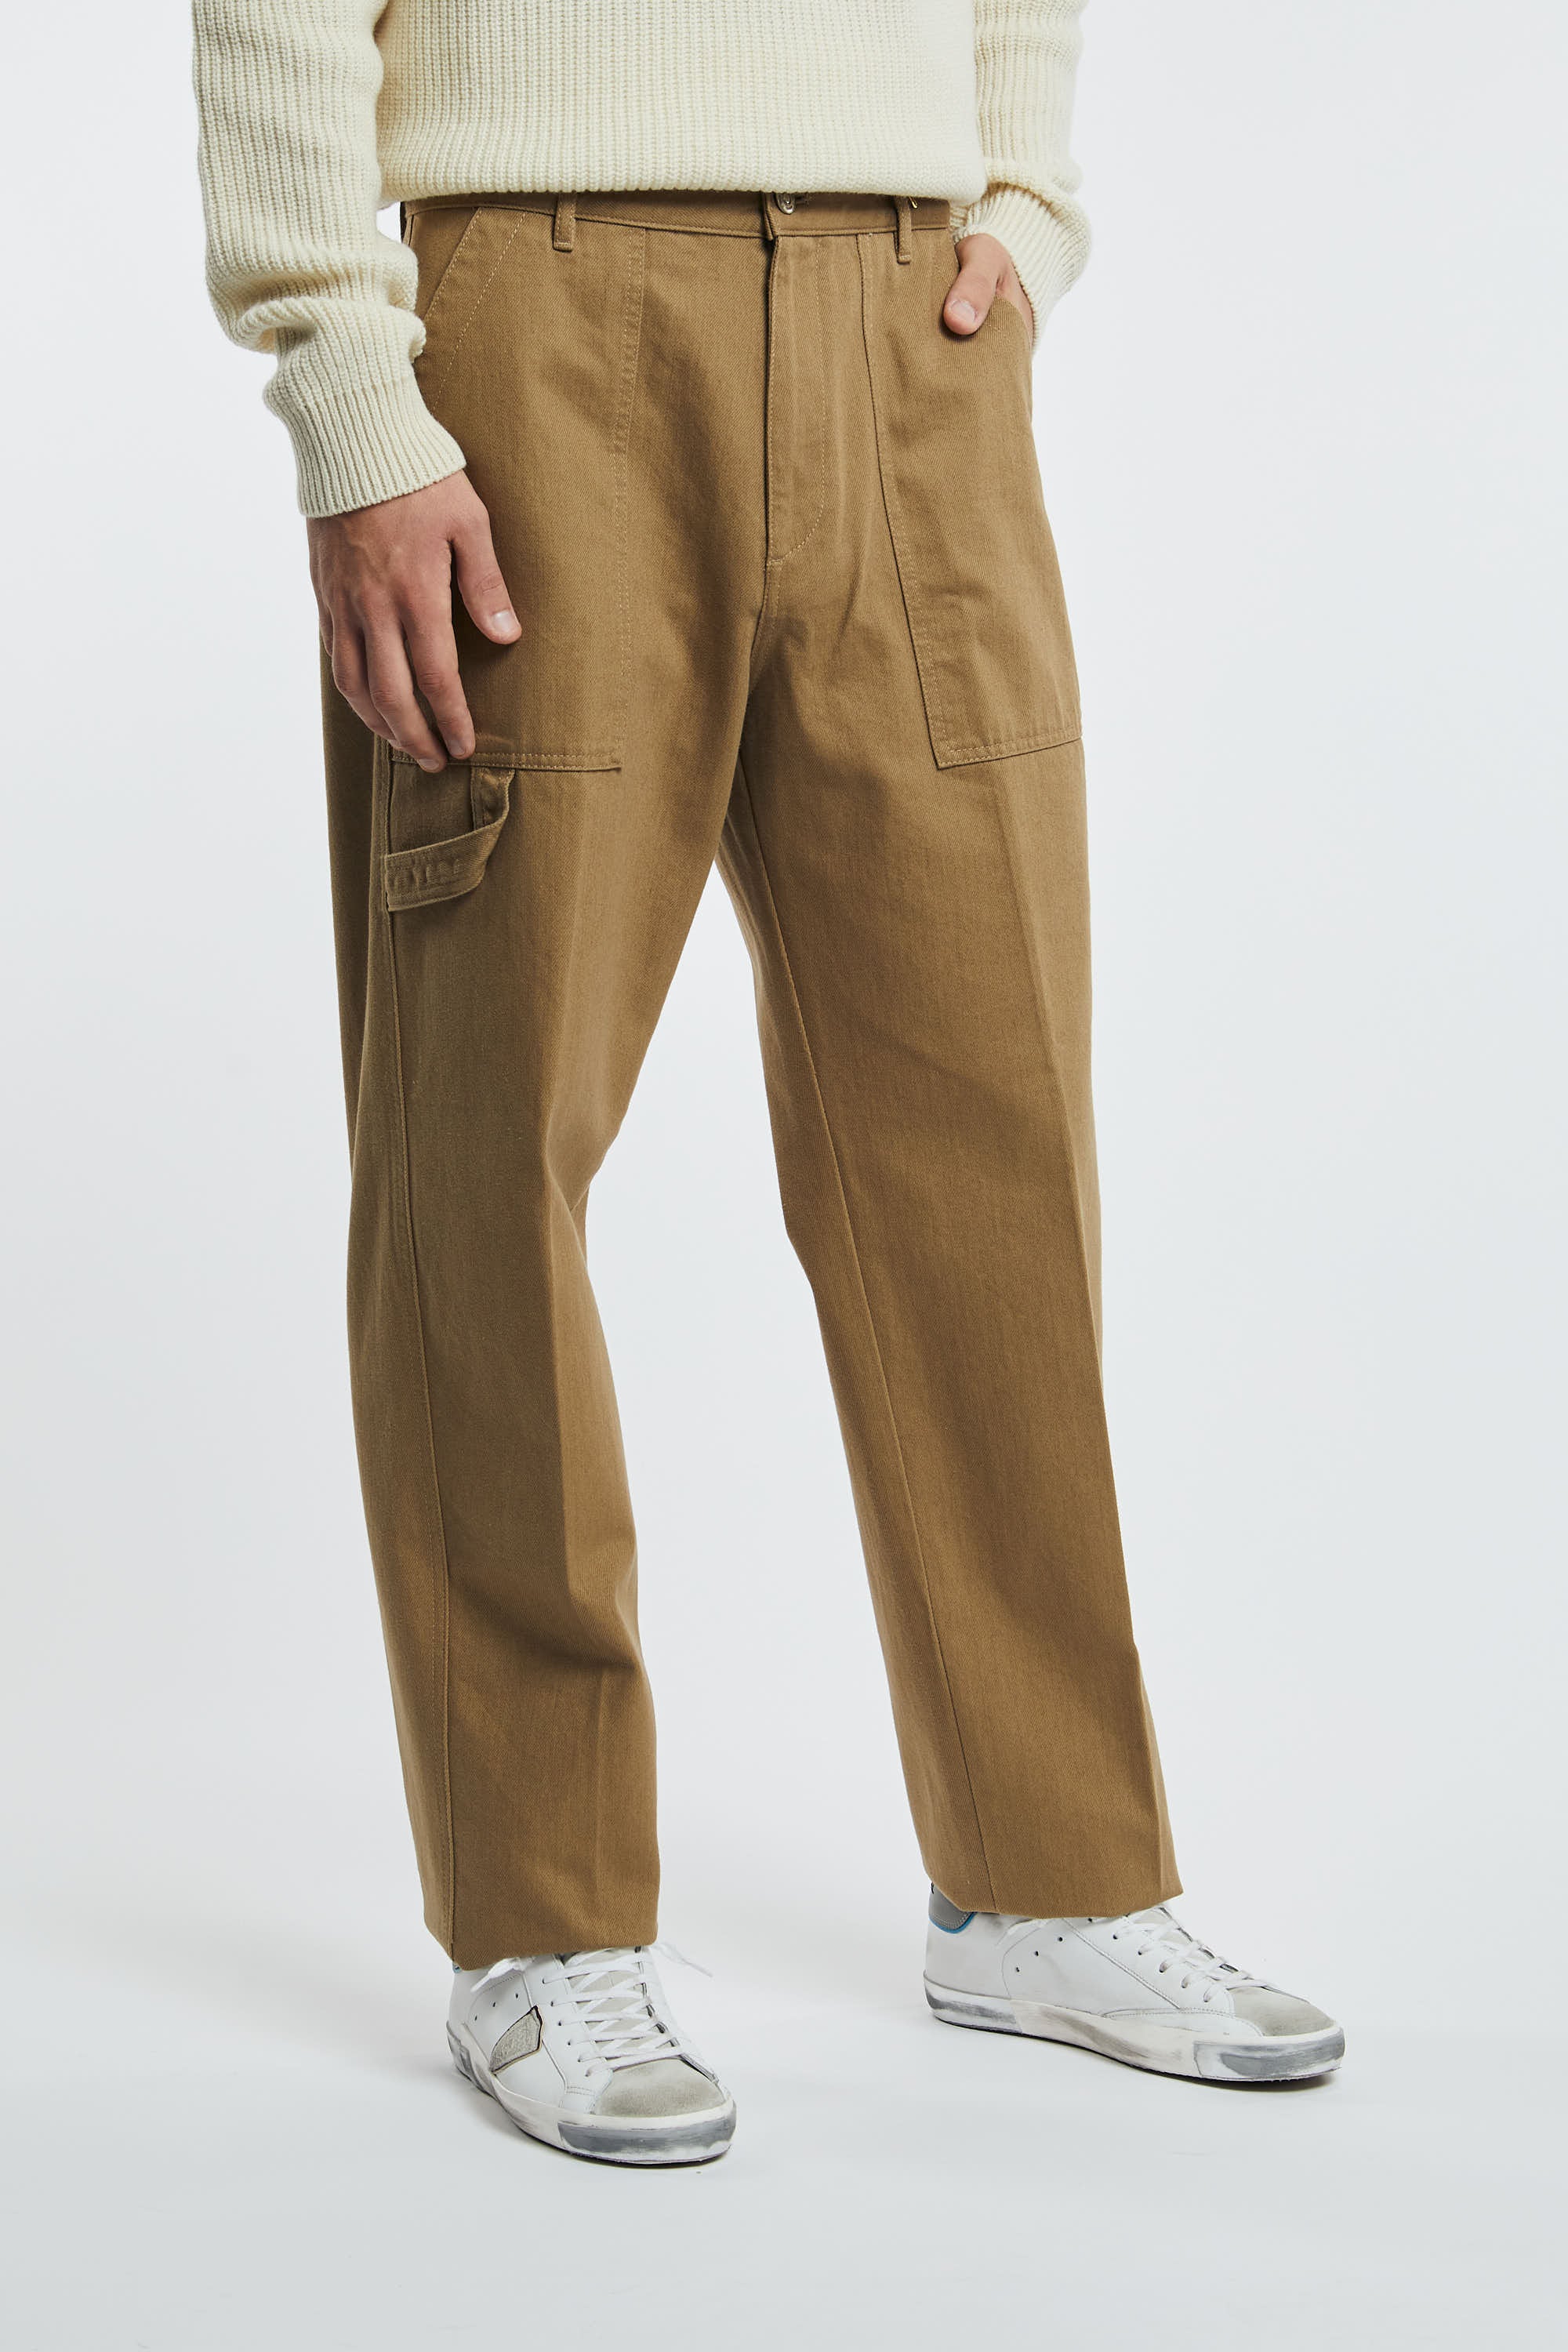 Philippe Model Charles Cotton Pants Beige-2